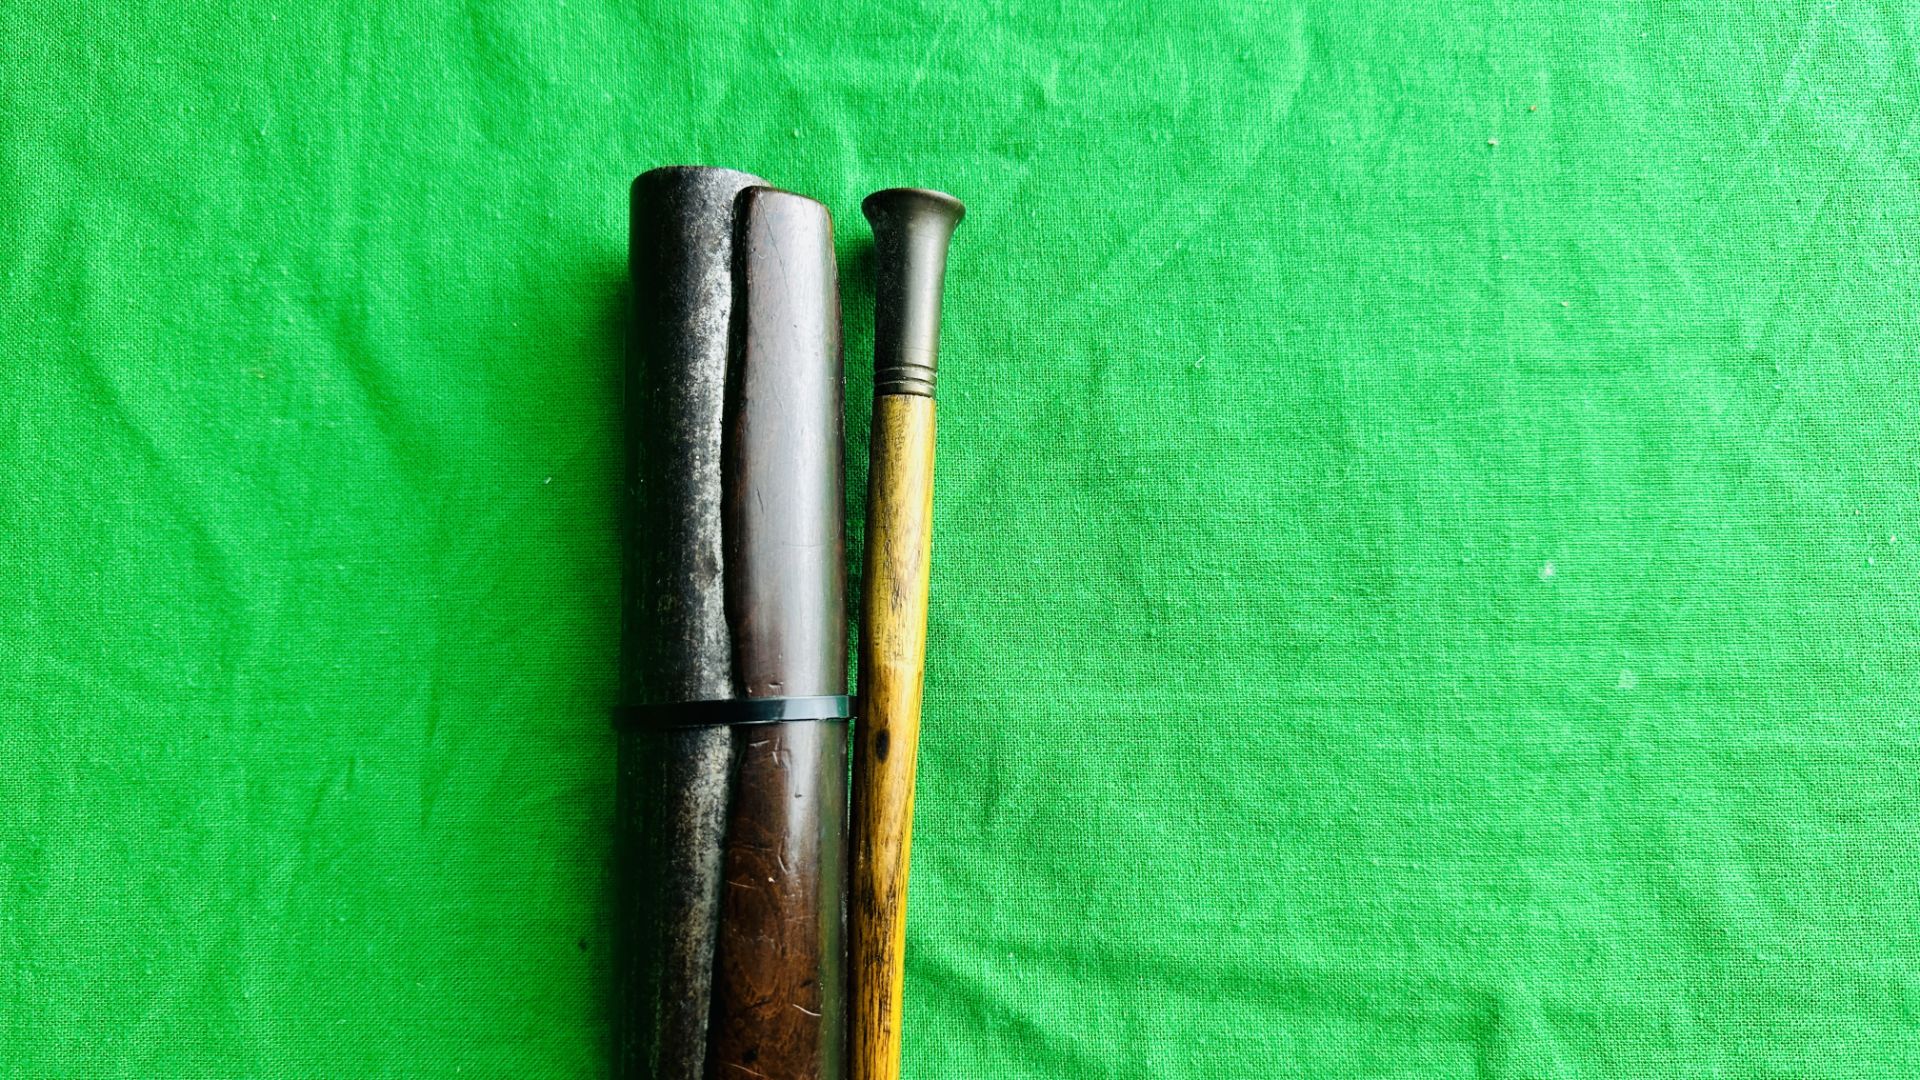 ANTIQUE PERCUSSION CAP MUZZLE LOADING SHOTGUN WITH LOADING ROD -COLLECTORS PIECE, - Image 7 of 18